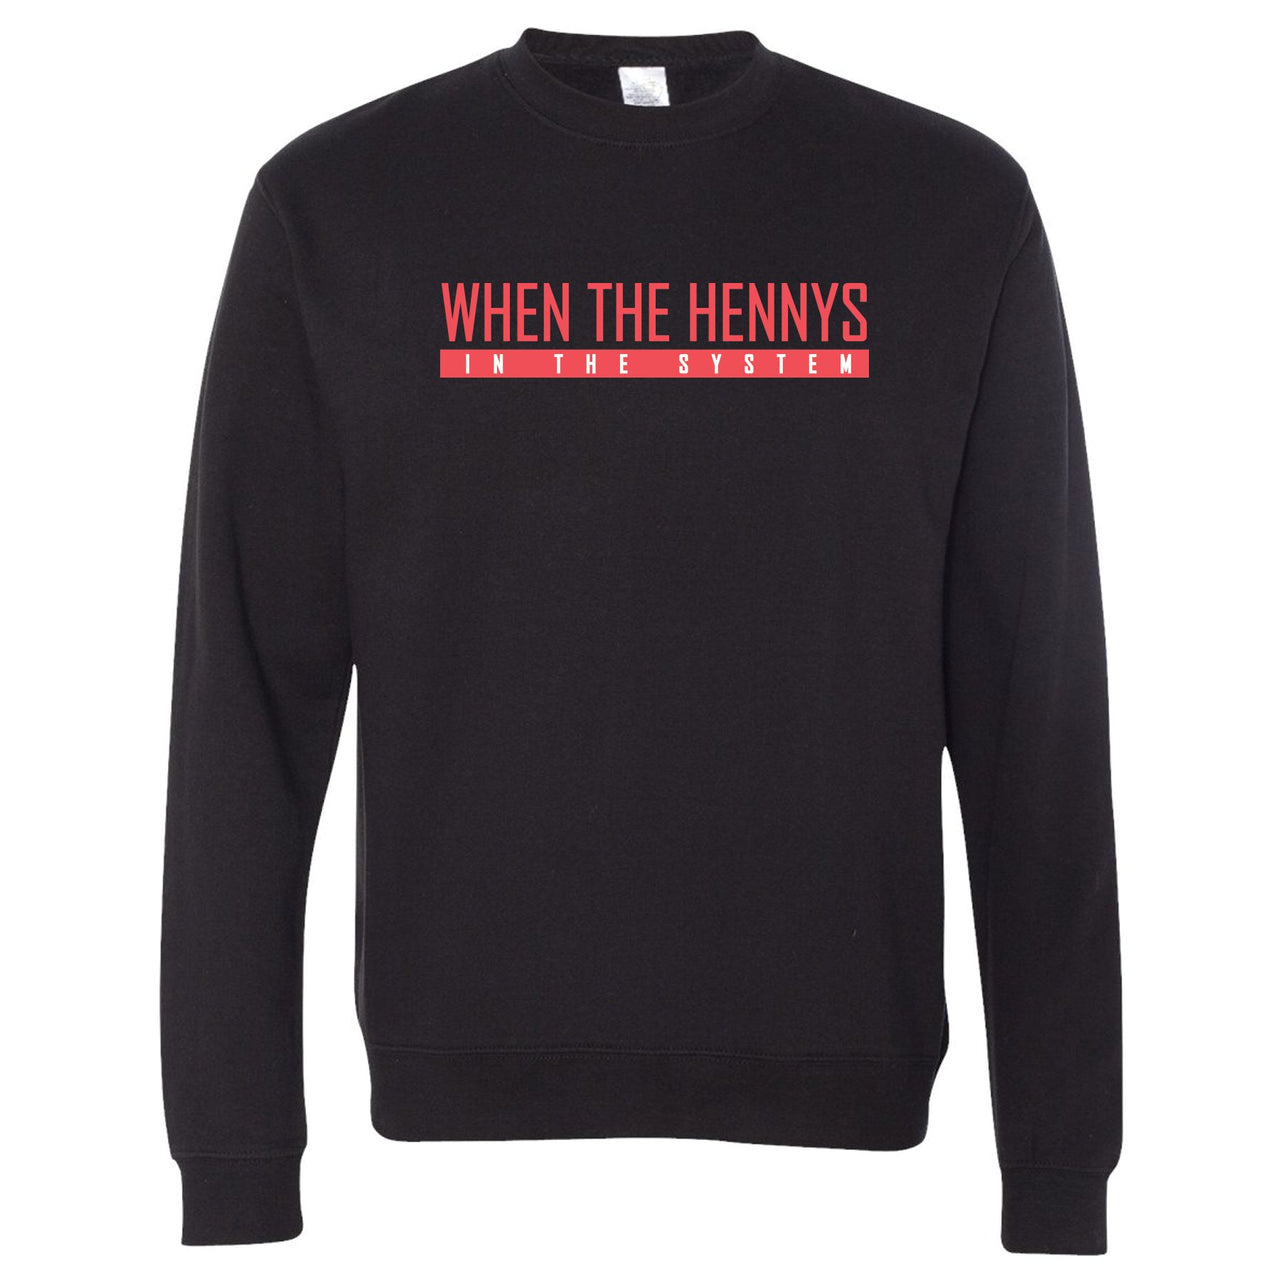 Infrared 6s Crewneck Sweatshirt | When The Hennys In The System, Black